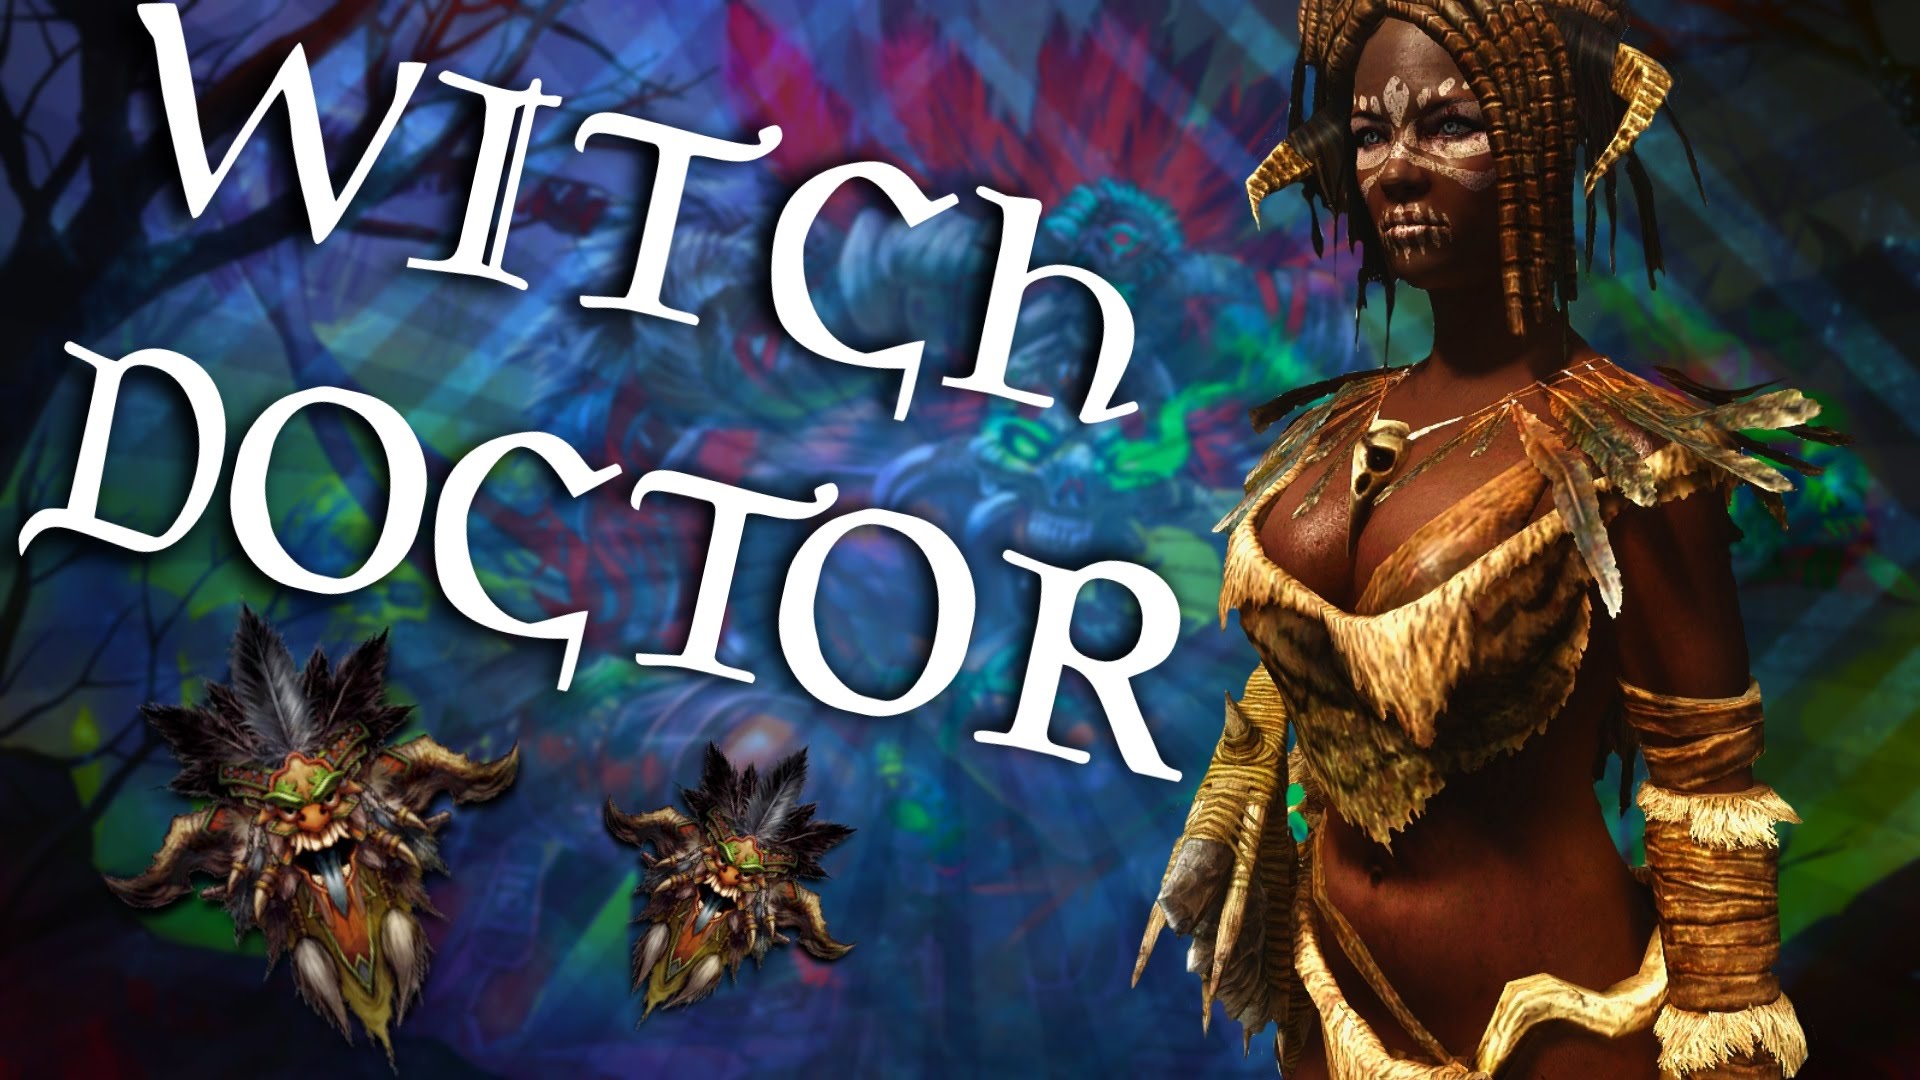 Nice wallpapers Witch Doctor 1920x1080px